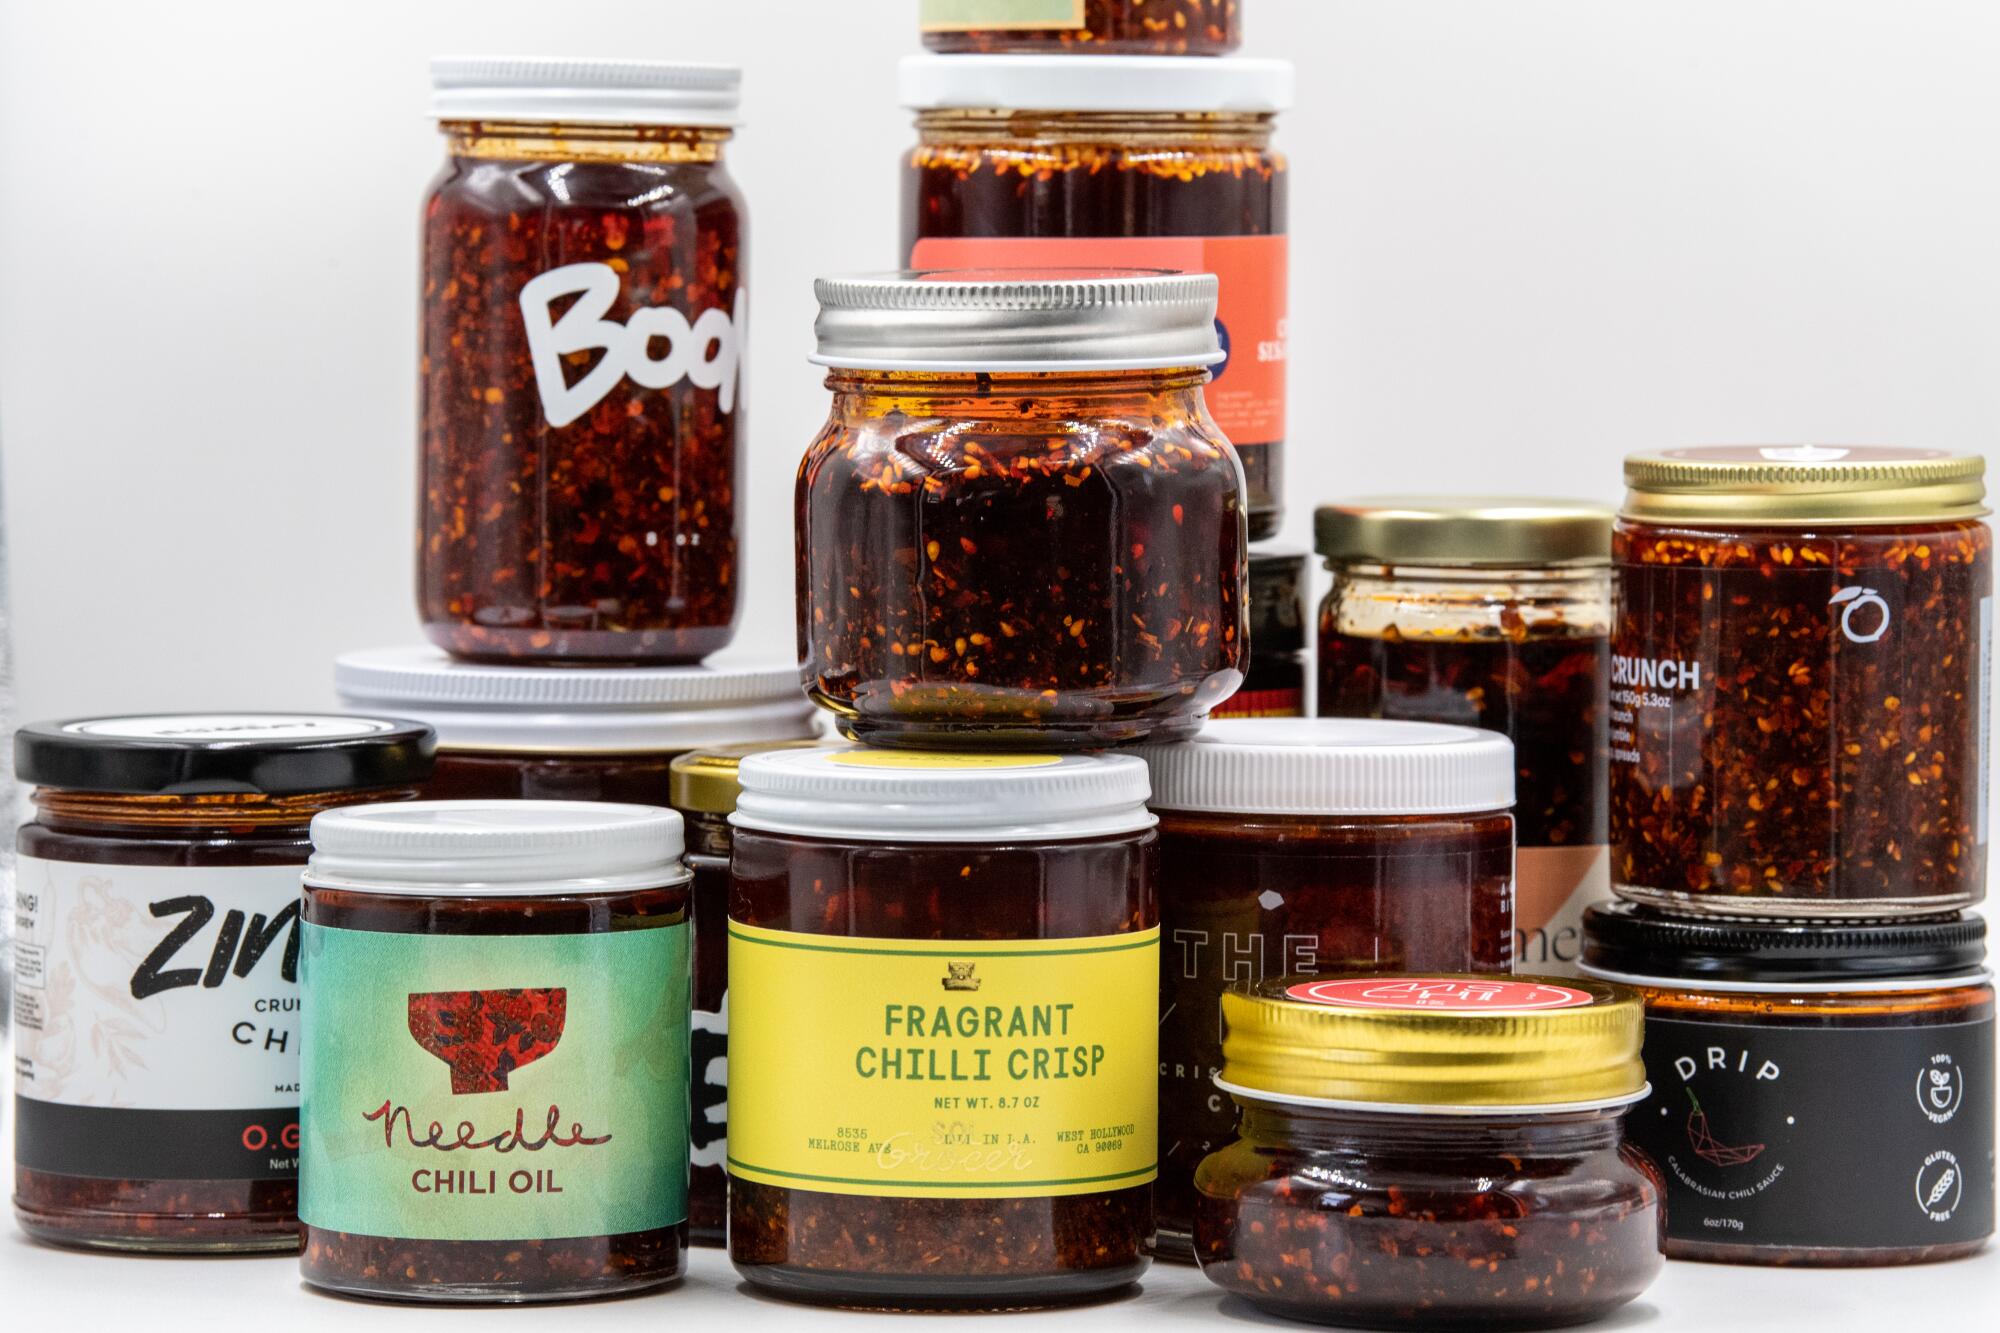 A collection of chili oil, crunchy and crunchy.